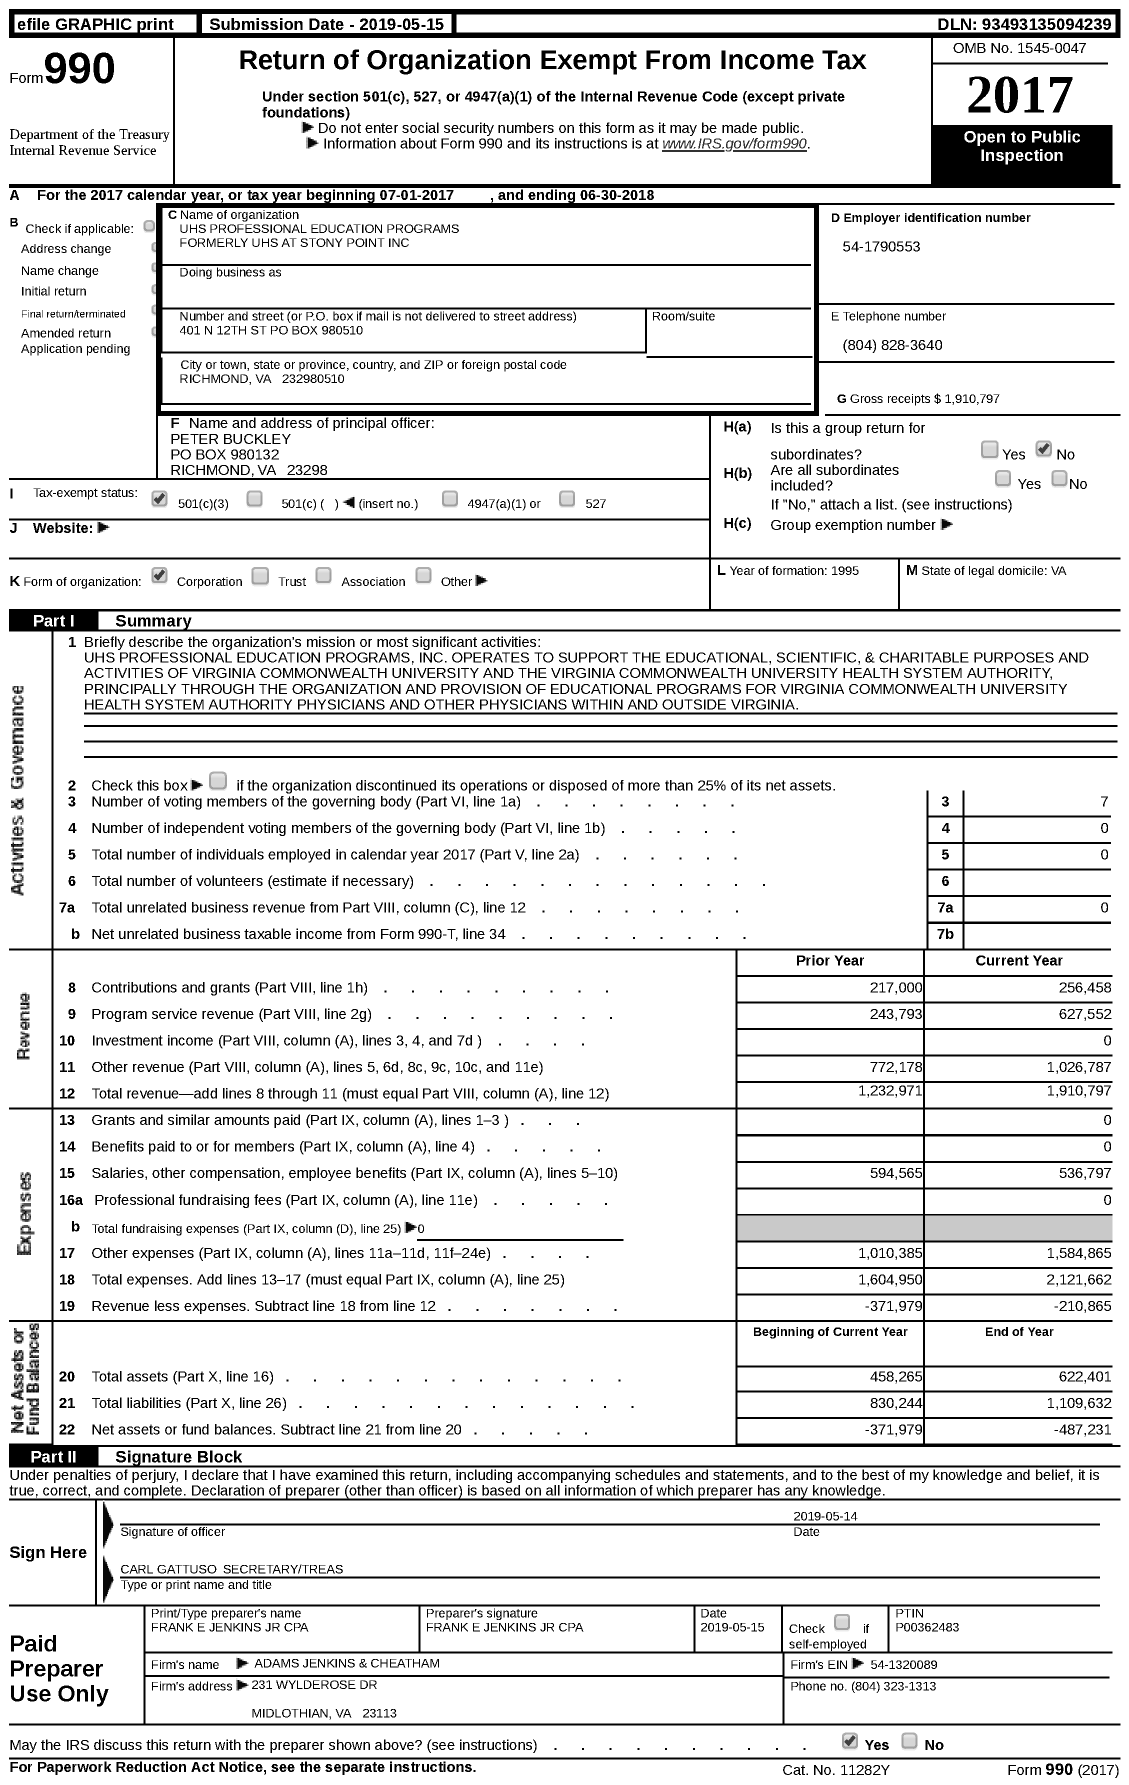 Image of first page of 2017 Form 990 for UHS Professional Education Programs